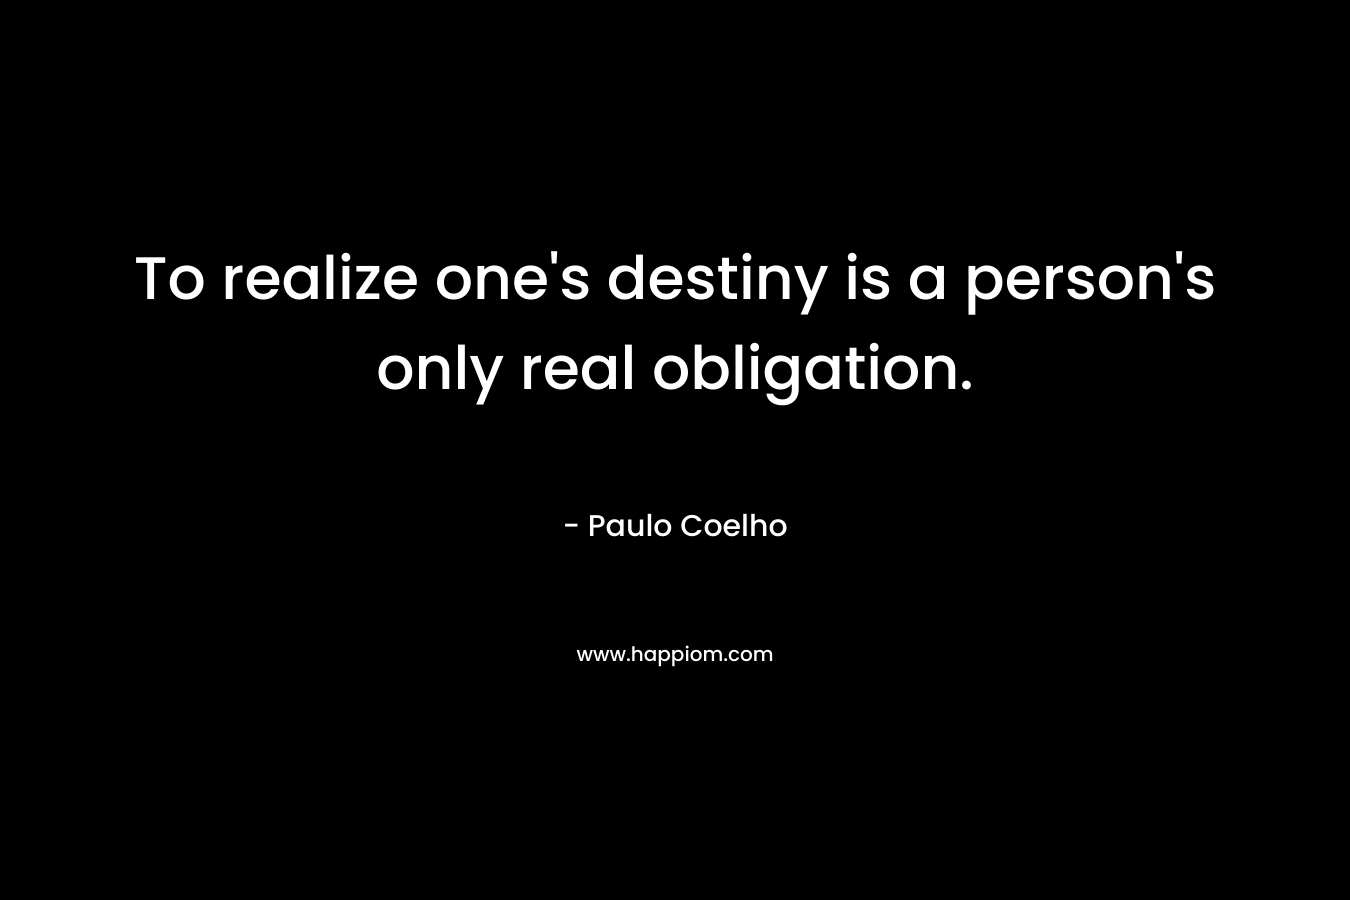 To realize one's destiny is a person's only real obligation.